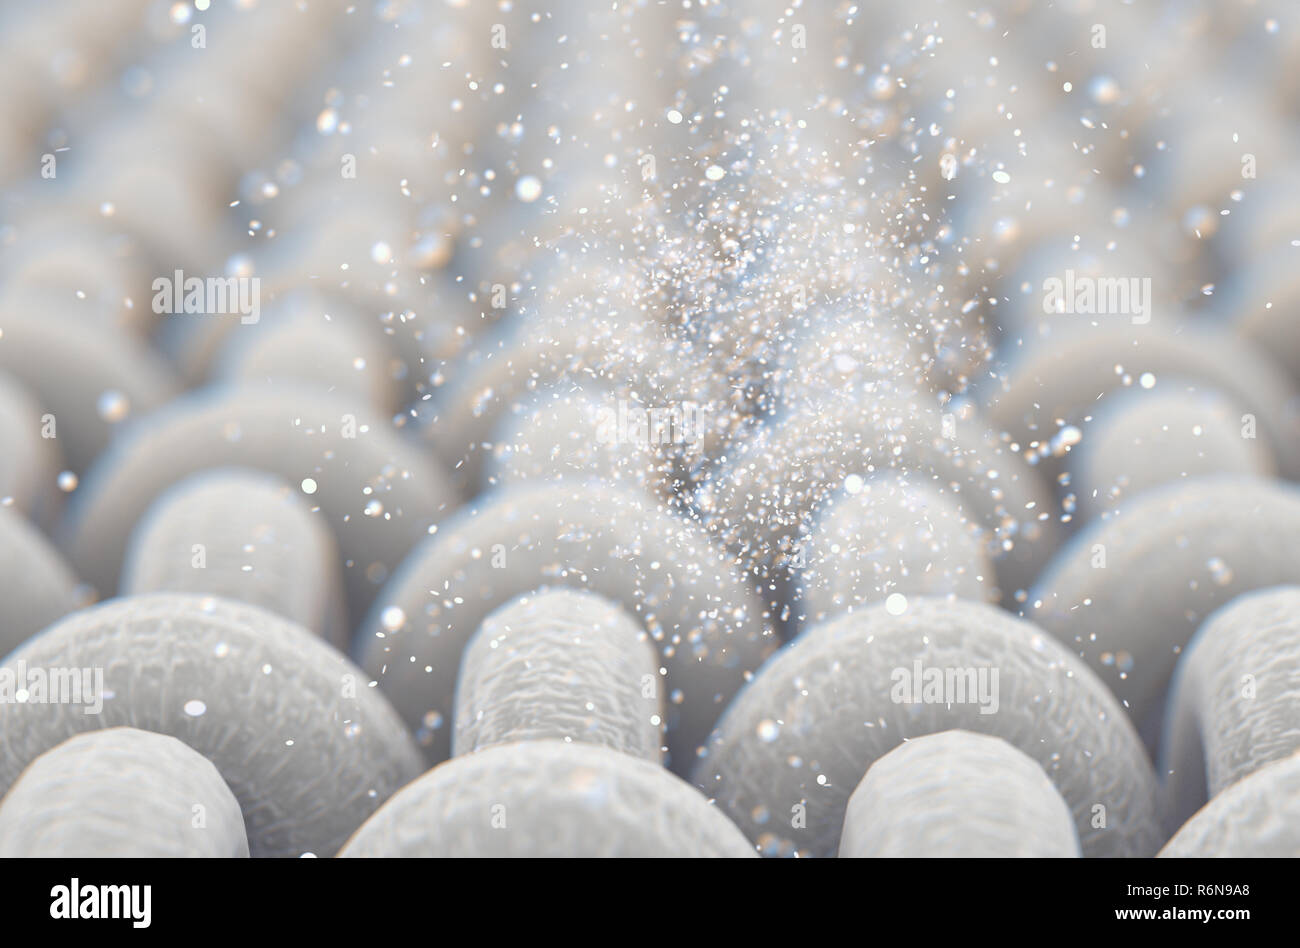 A microscopic close up view of a simple woven textile and a visible white particles  - 3D render Stock Photo